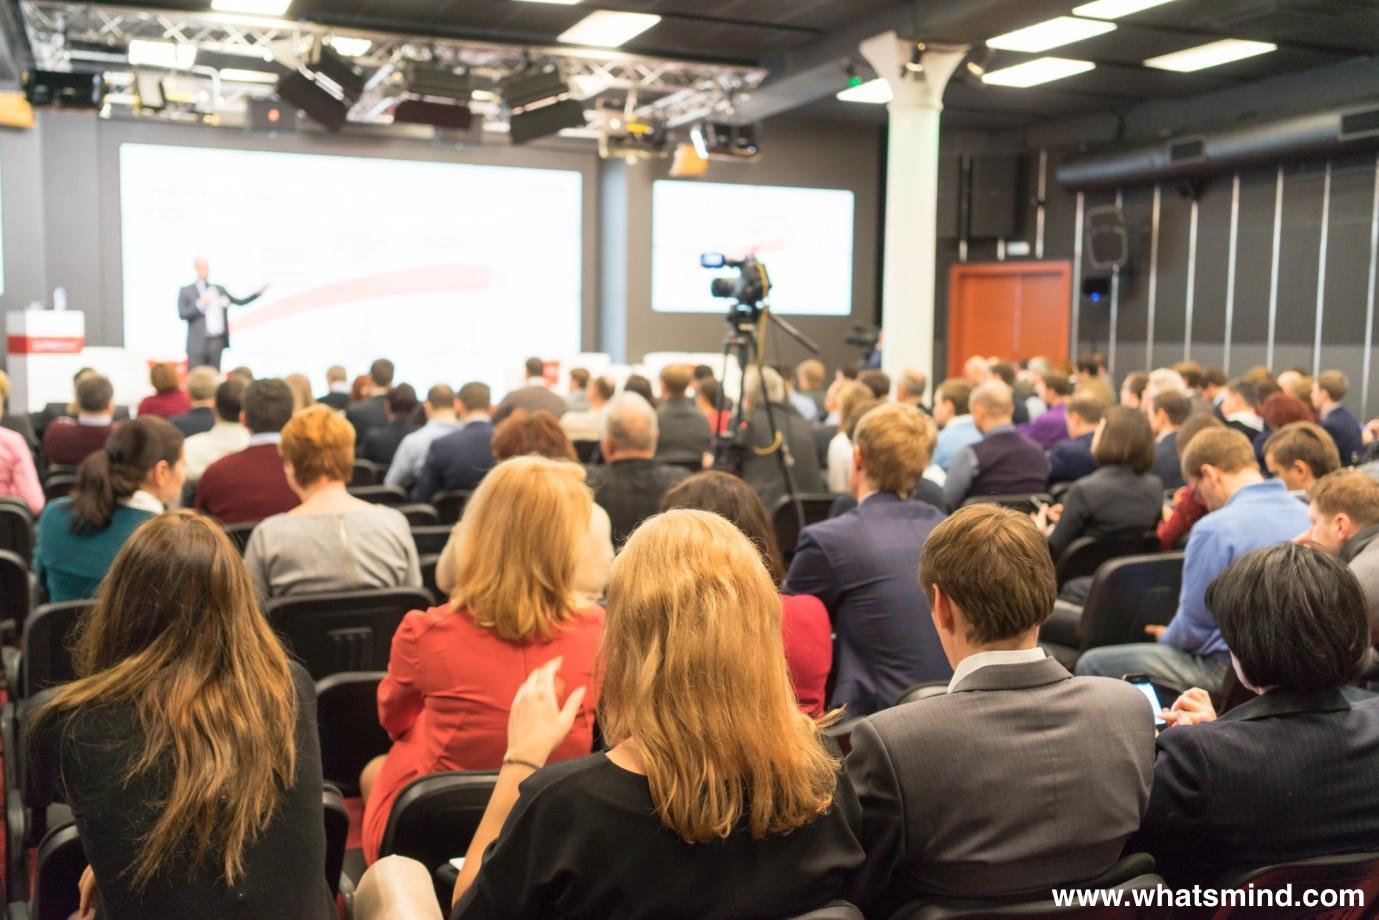 How to Get the Most Out of Your Business Conference Experience